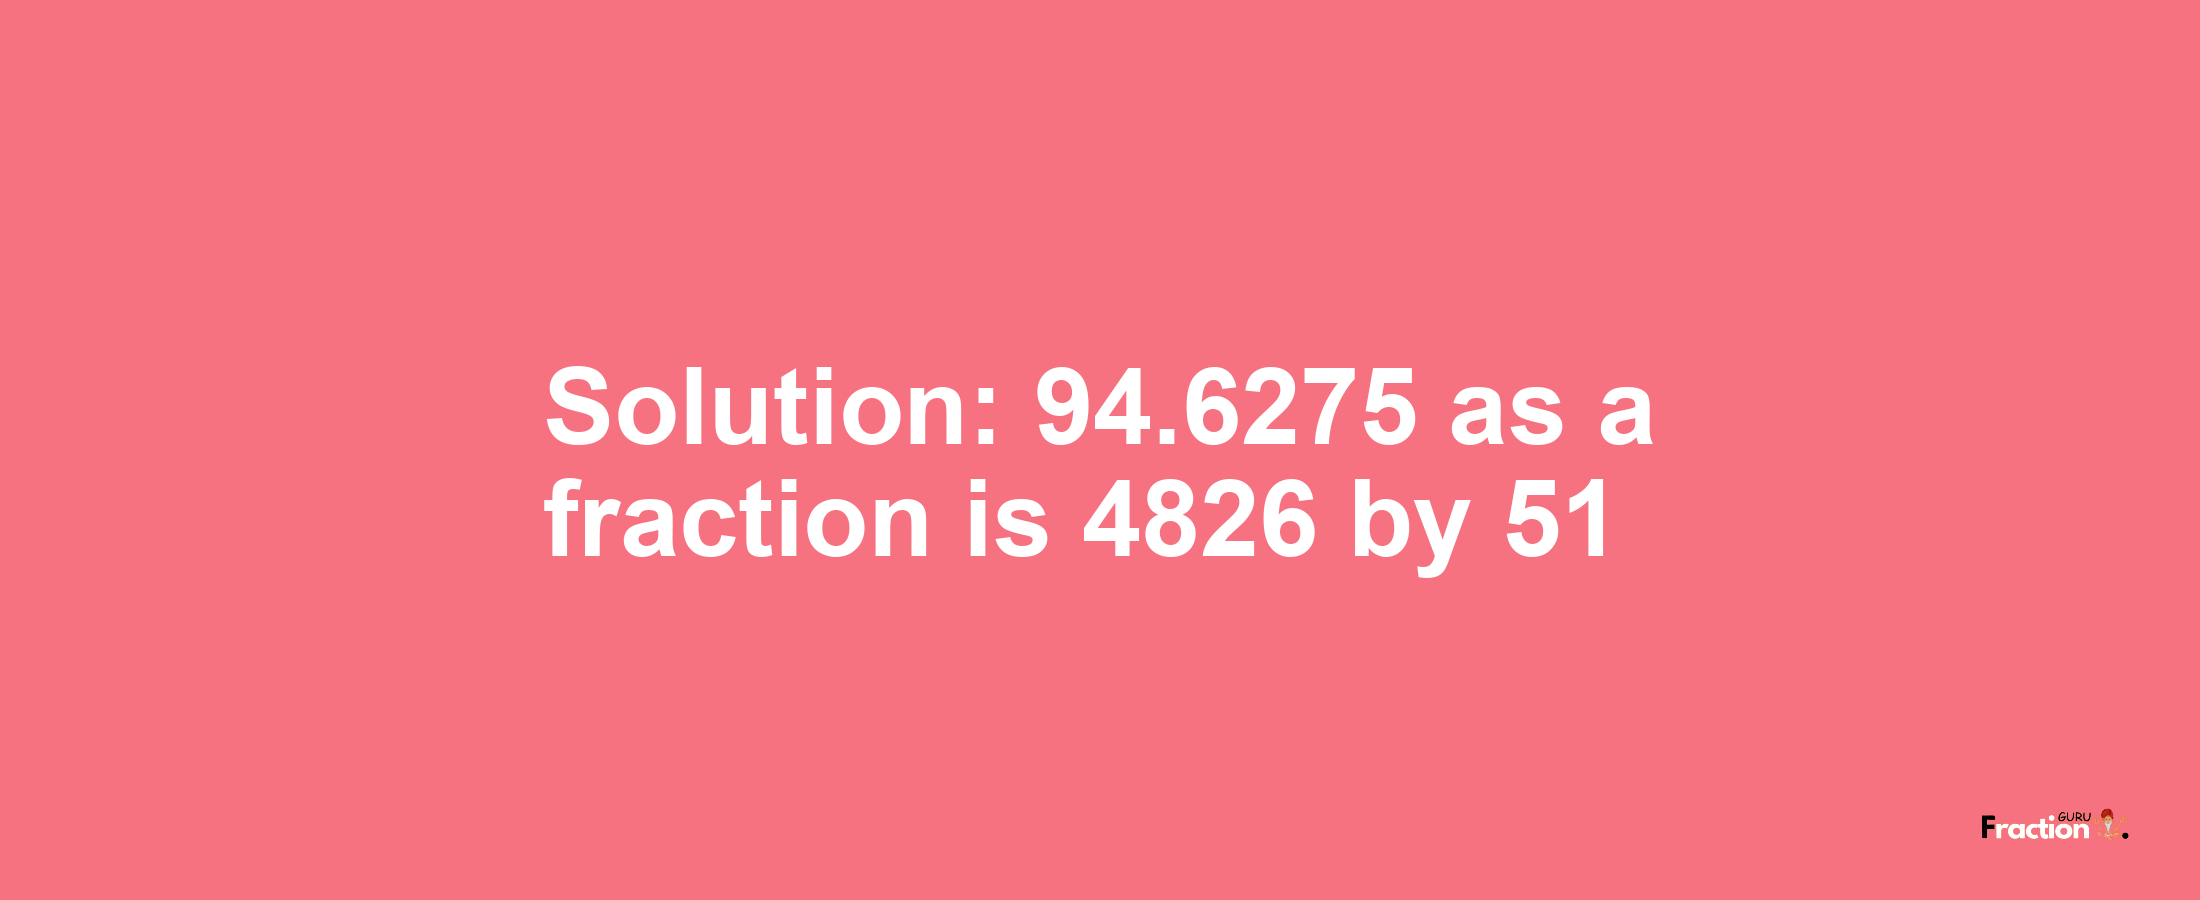 Solution:94.6275 as a fraction is 4826/51